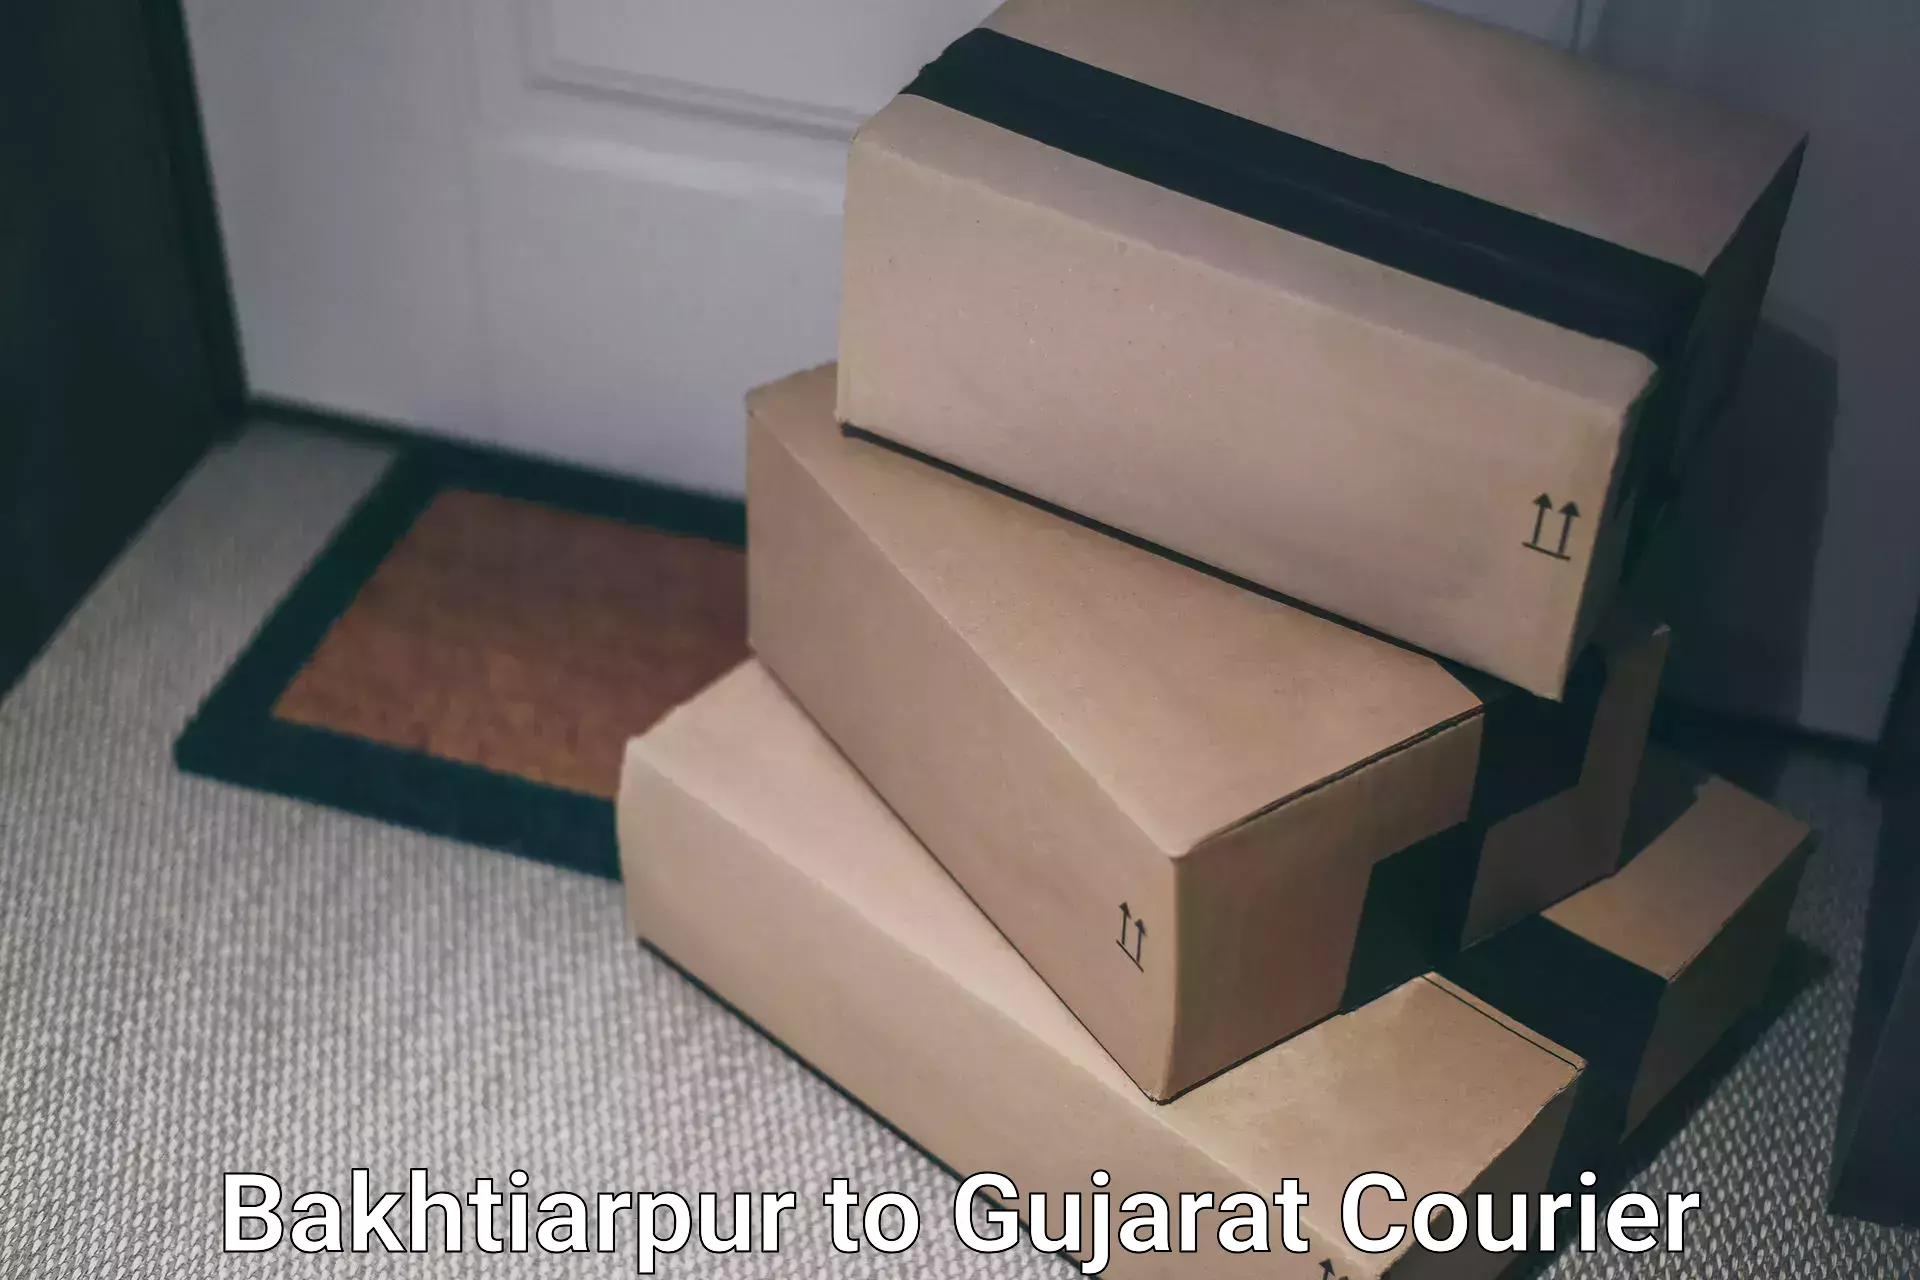 Flexible delivery schedules Bakhtiarpur to Anand